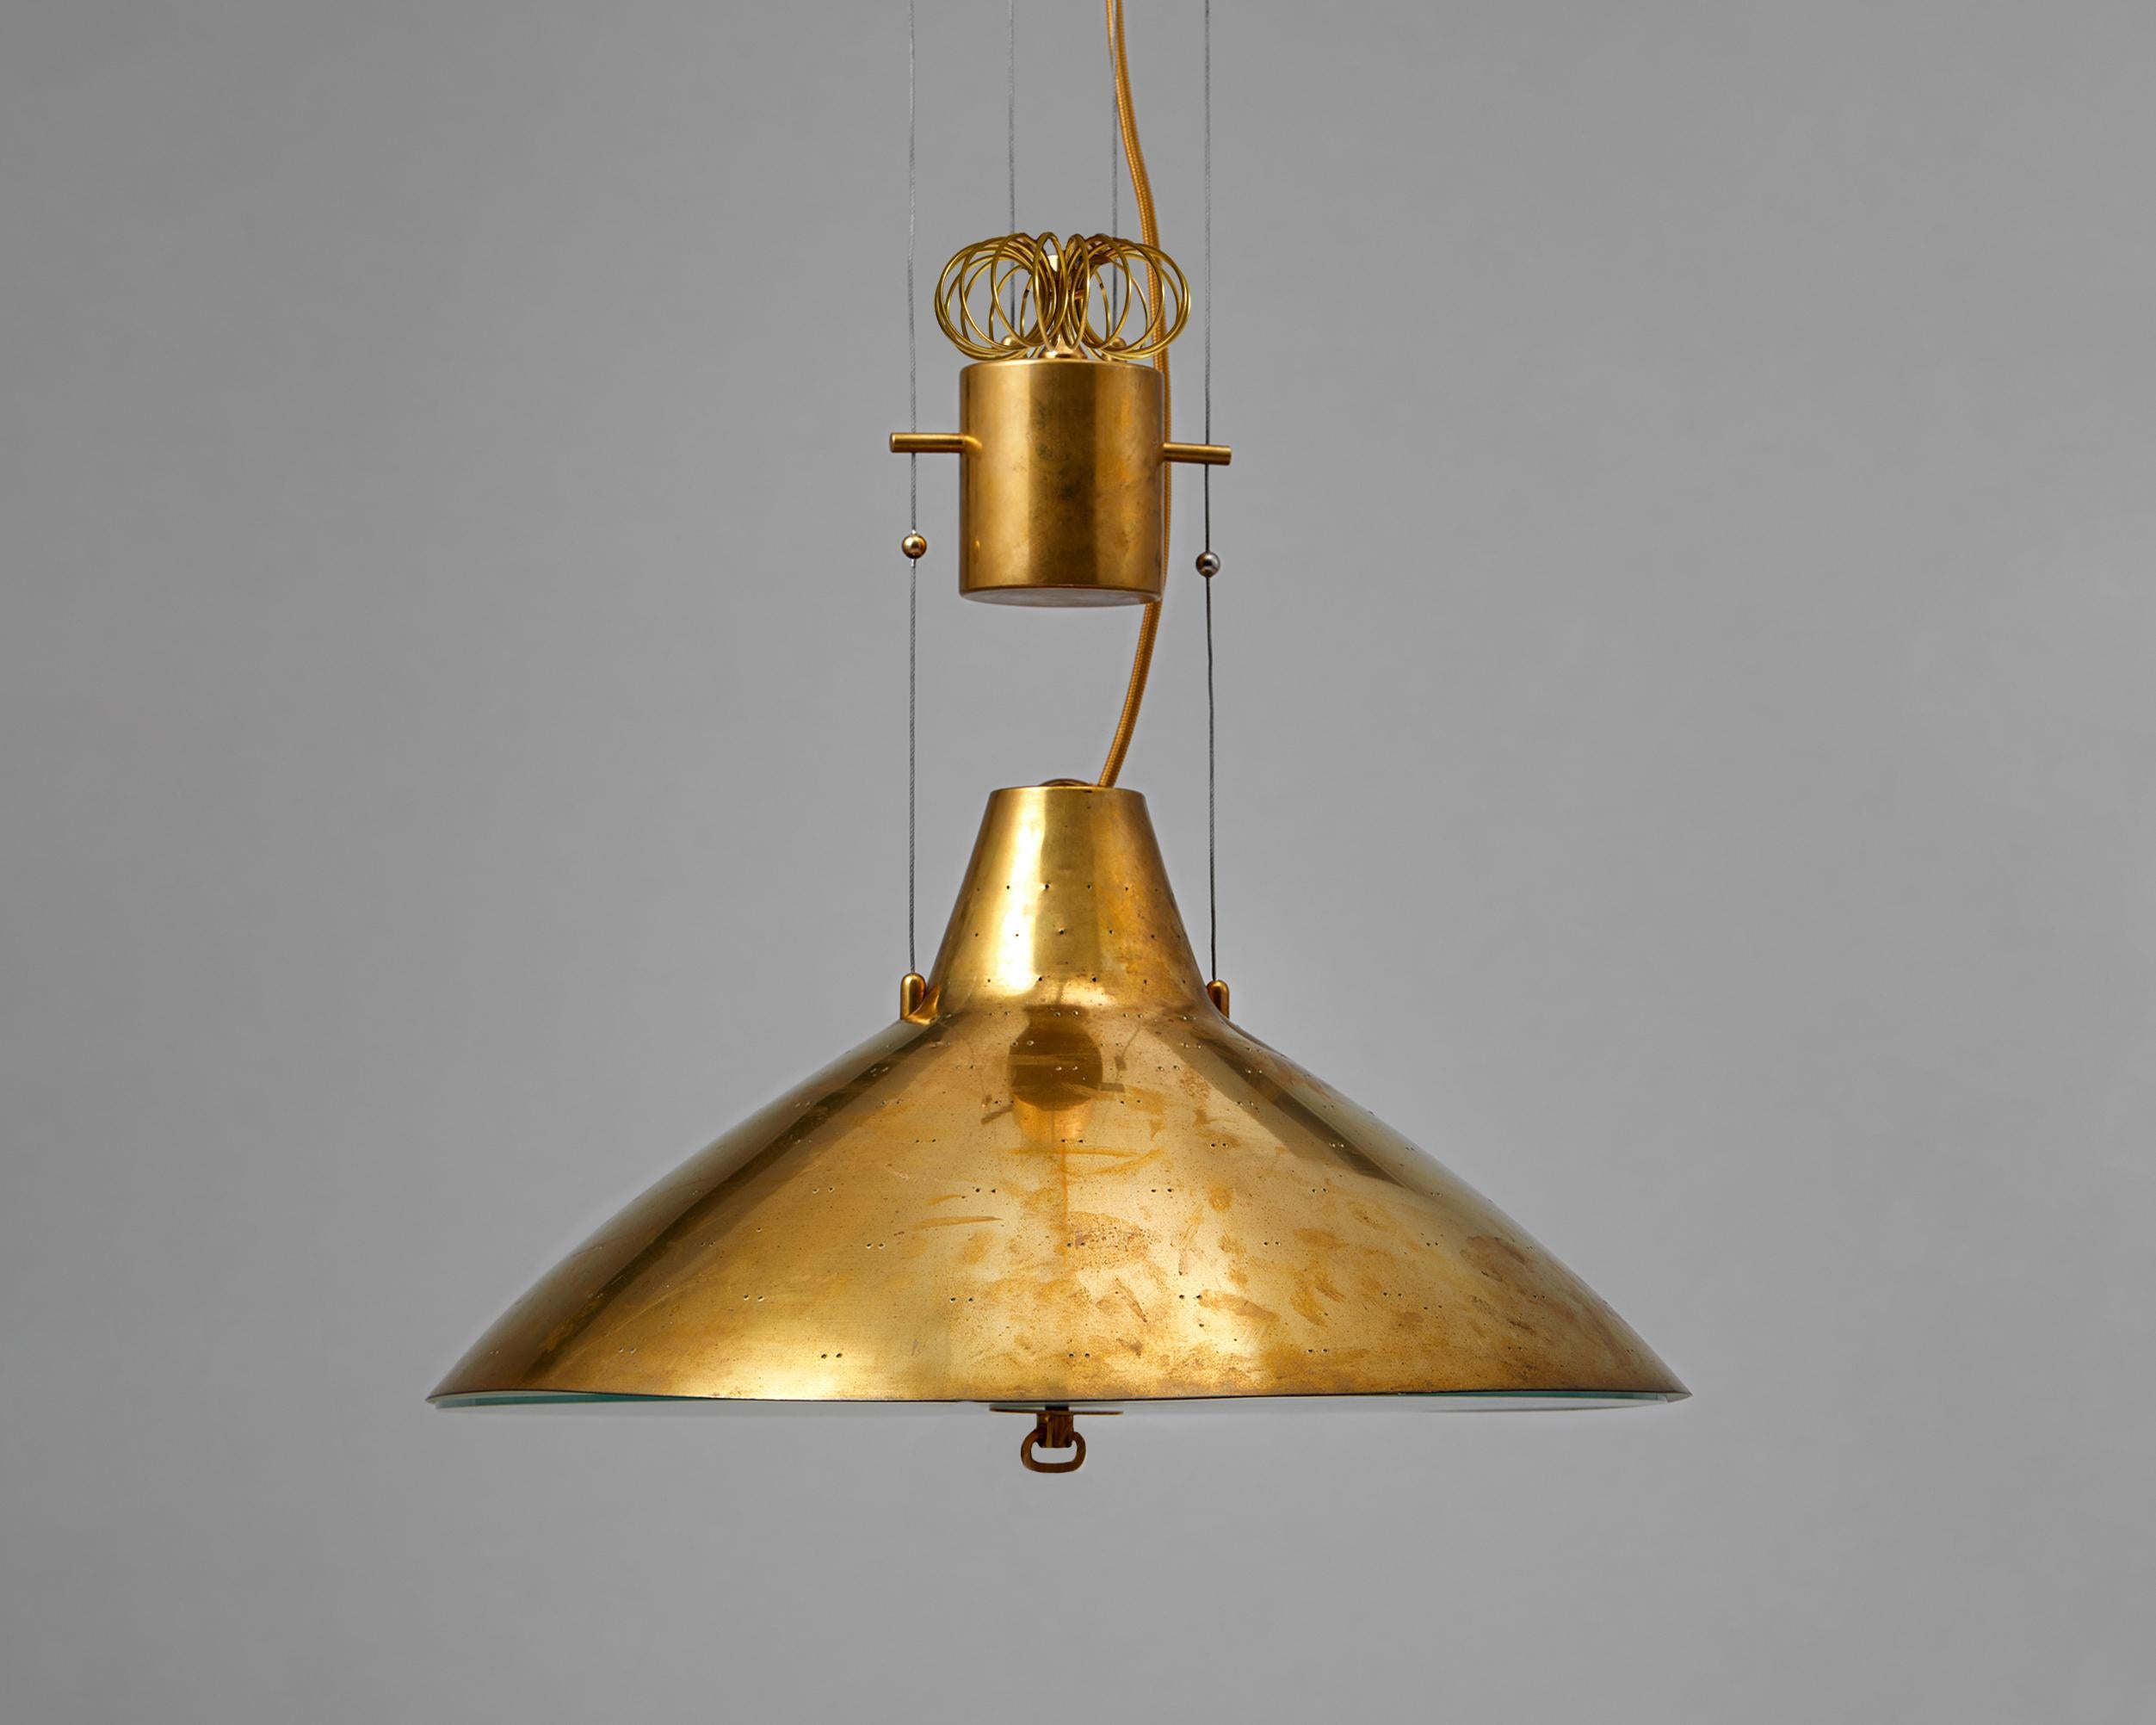 Ceiling lamp model ’10166’ designed by Paavo Tynell for Taito OY,
Finland, 1950.
Brass and frosted glass.

Stamped.

Measures: Height: 140 cm / 4’ 7”
Diameter: 49 cm / 1’ 7 1/2